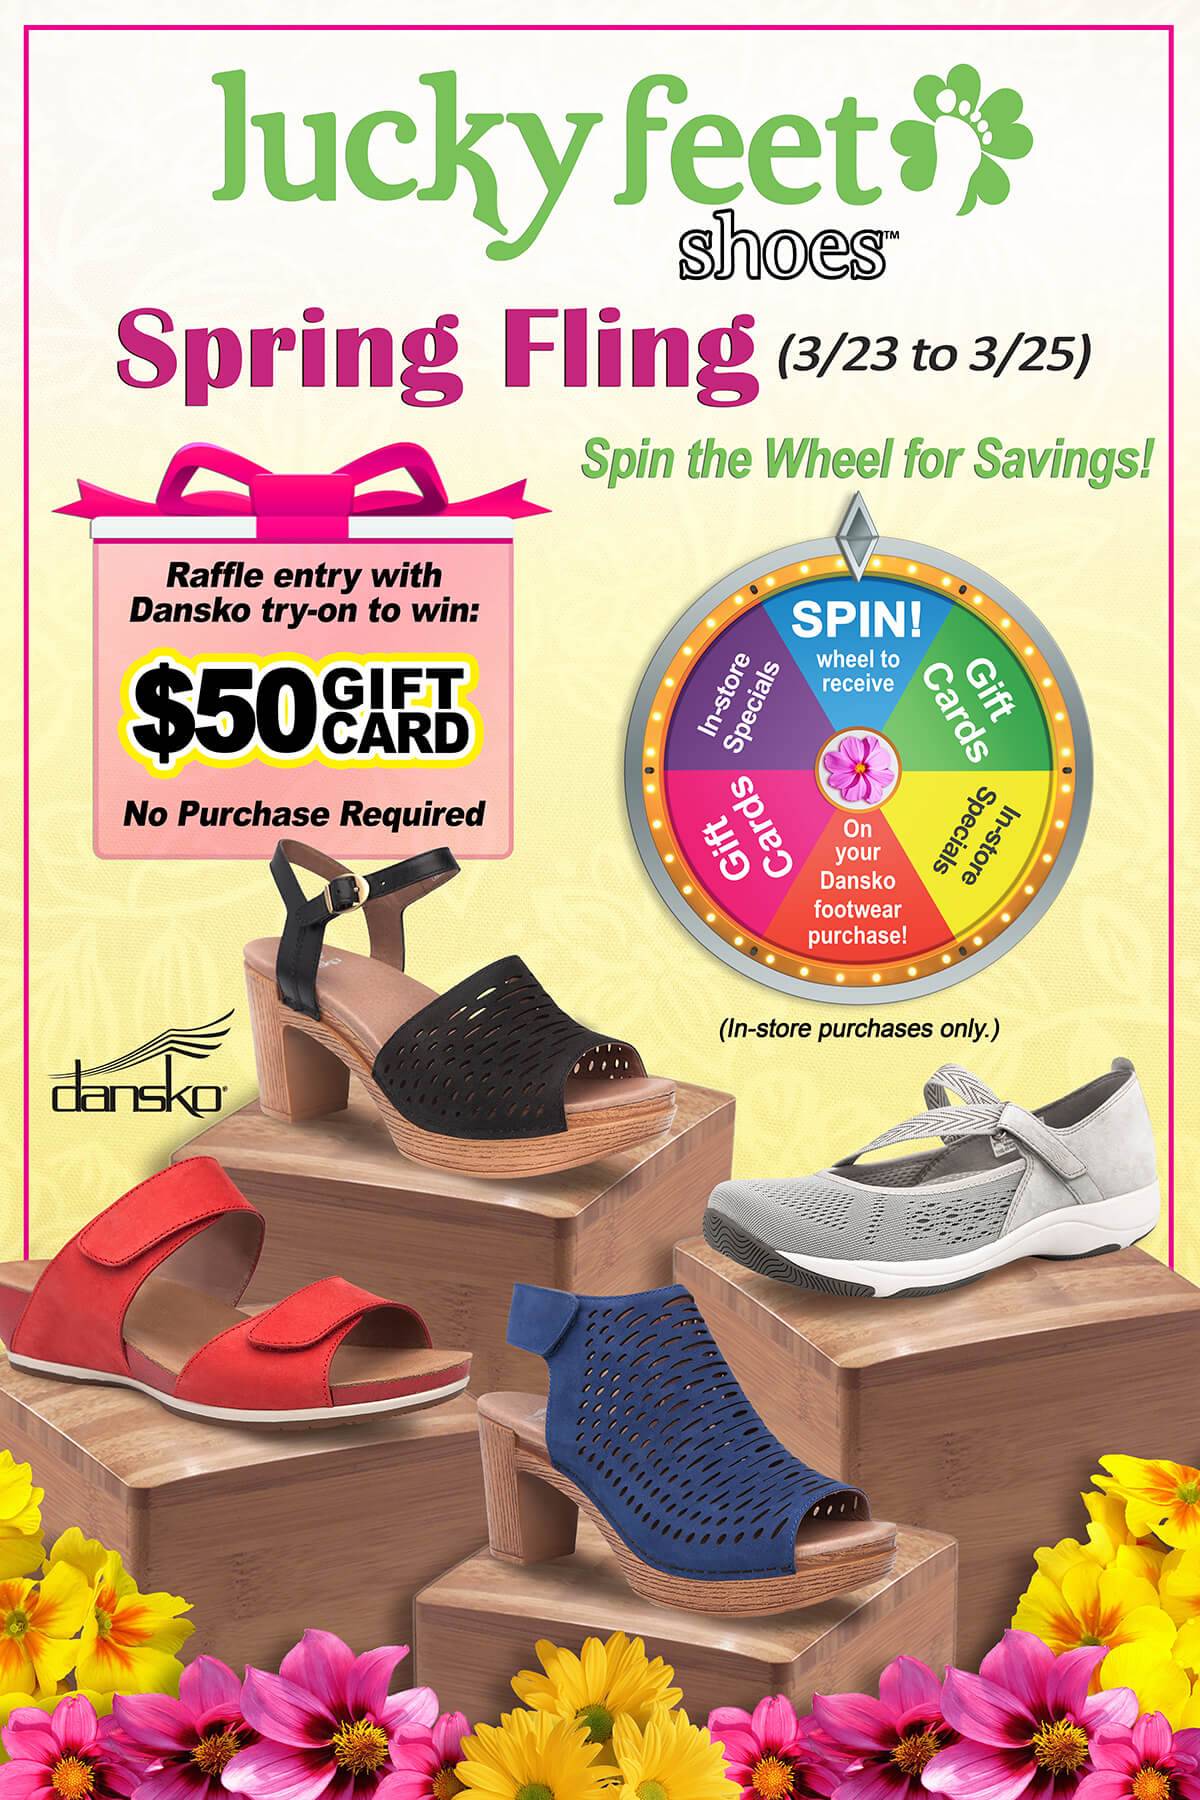 Lucky Feet Shoes Spring Fling Featuring 